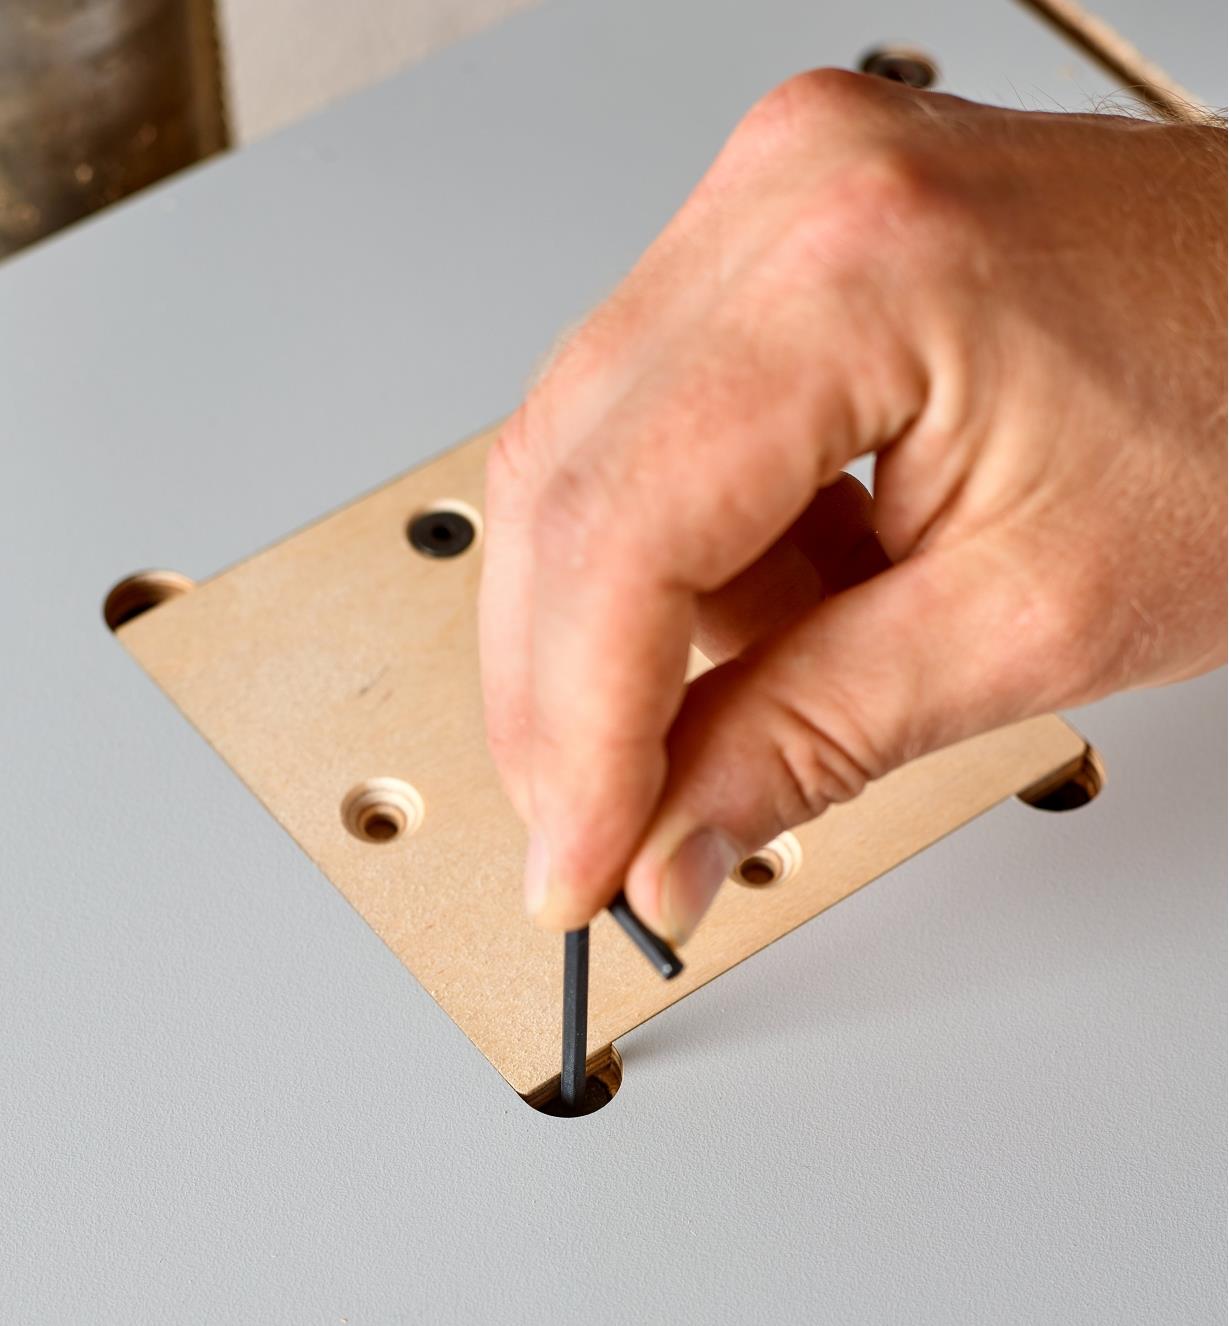 Using built-in levelling screws to set the wooden insert flush with the drill-press table surface